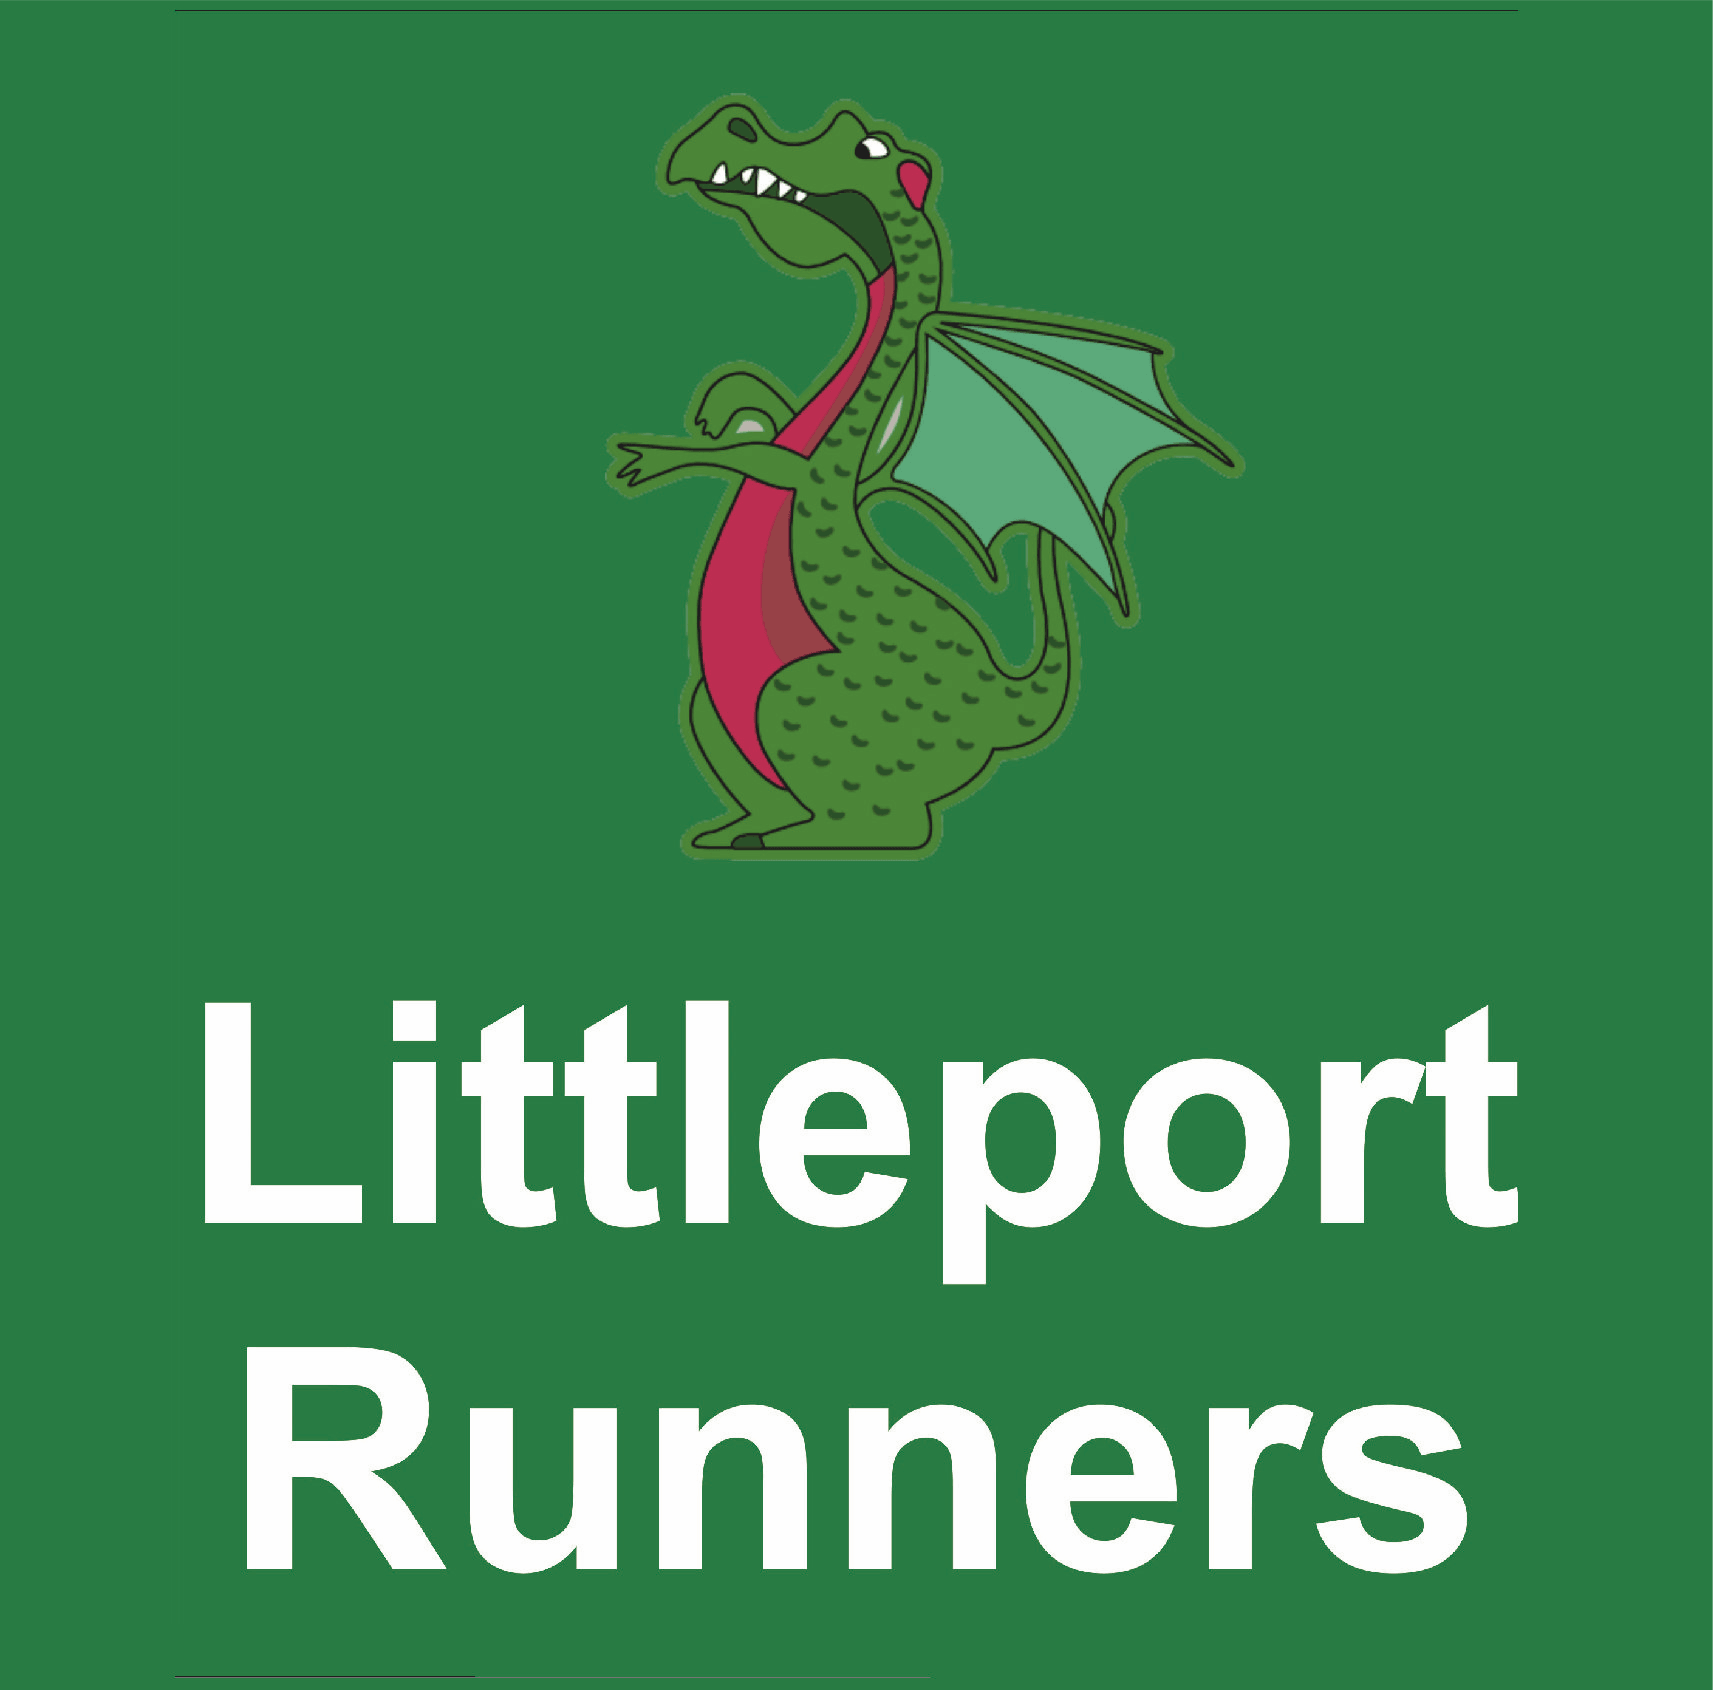 Littleport runners logo sigma embroidery